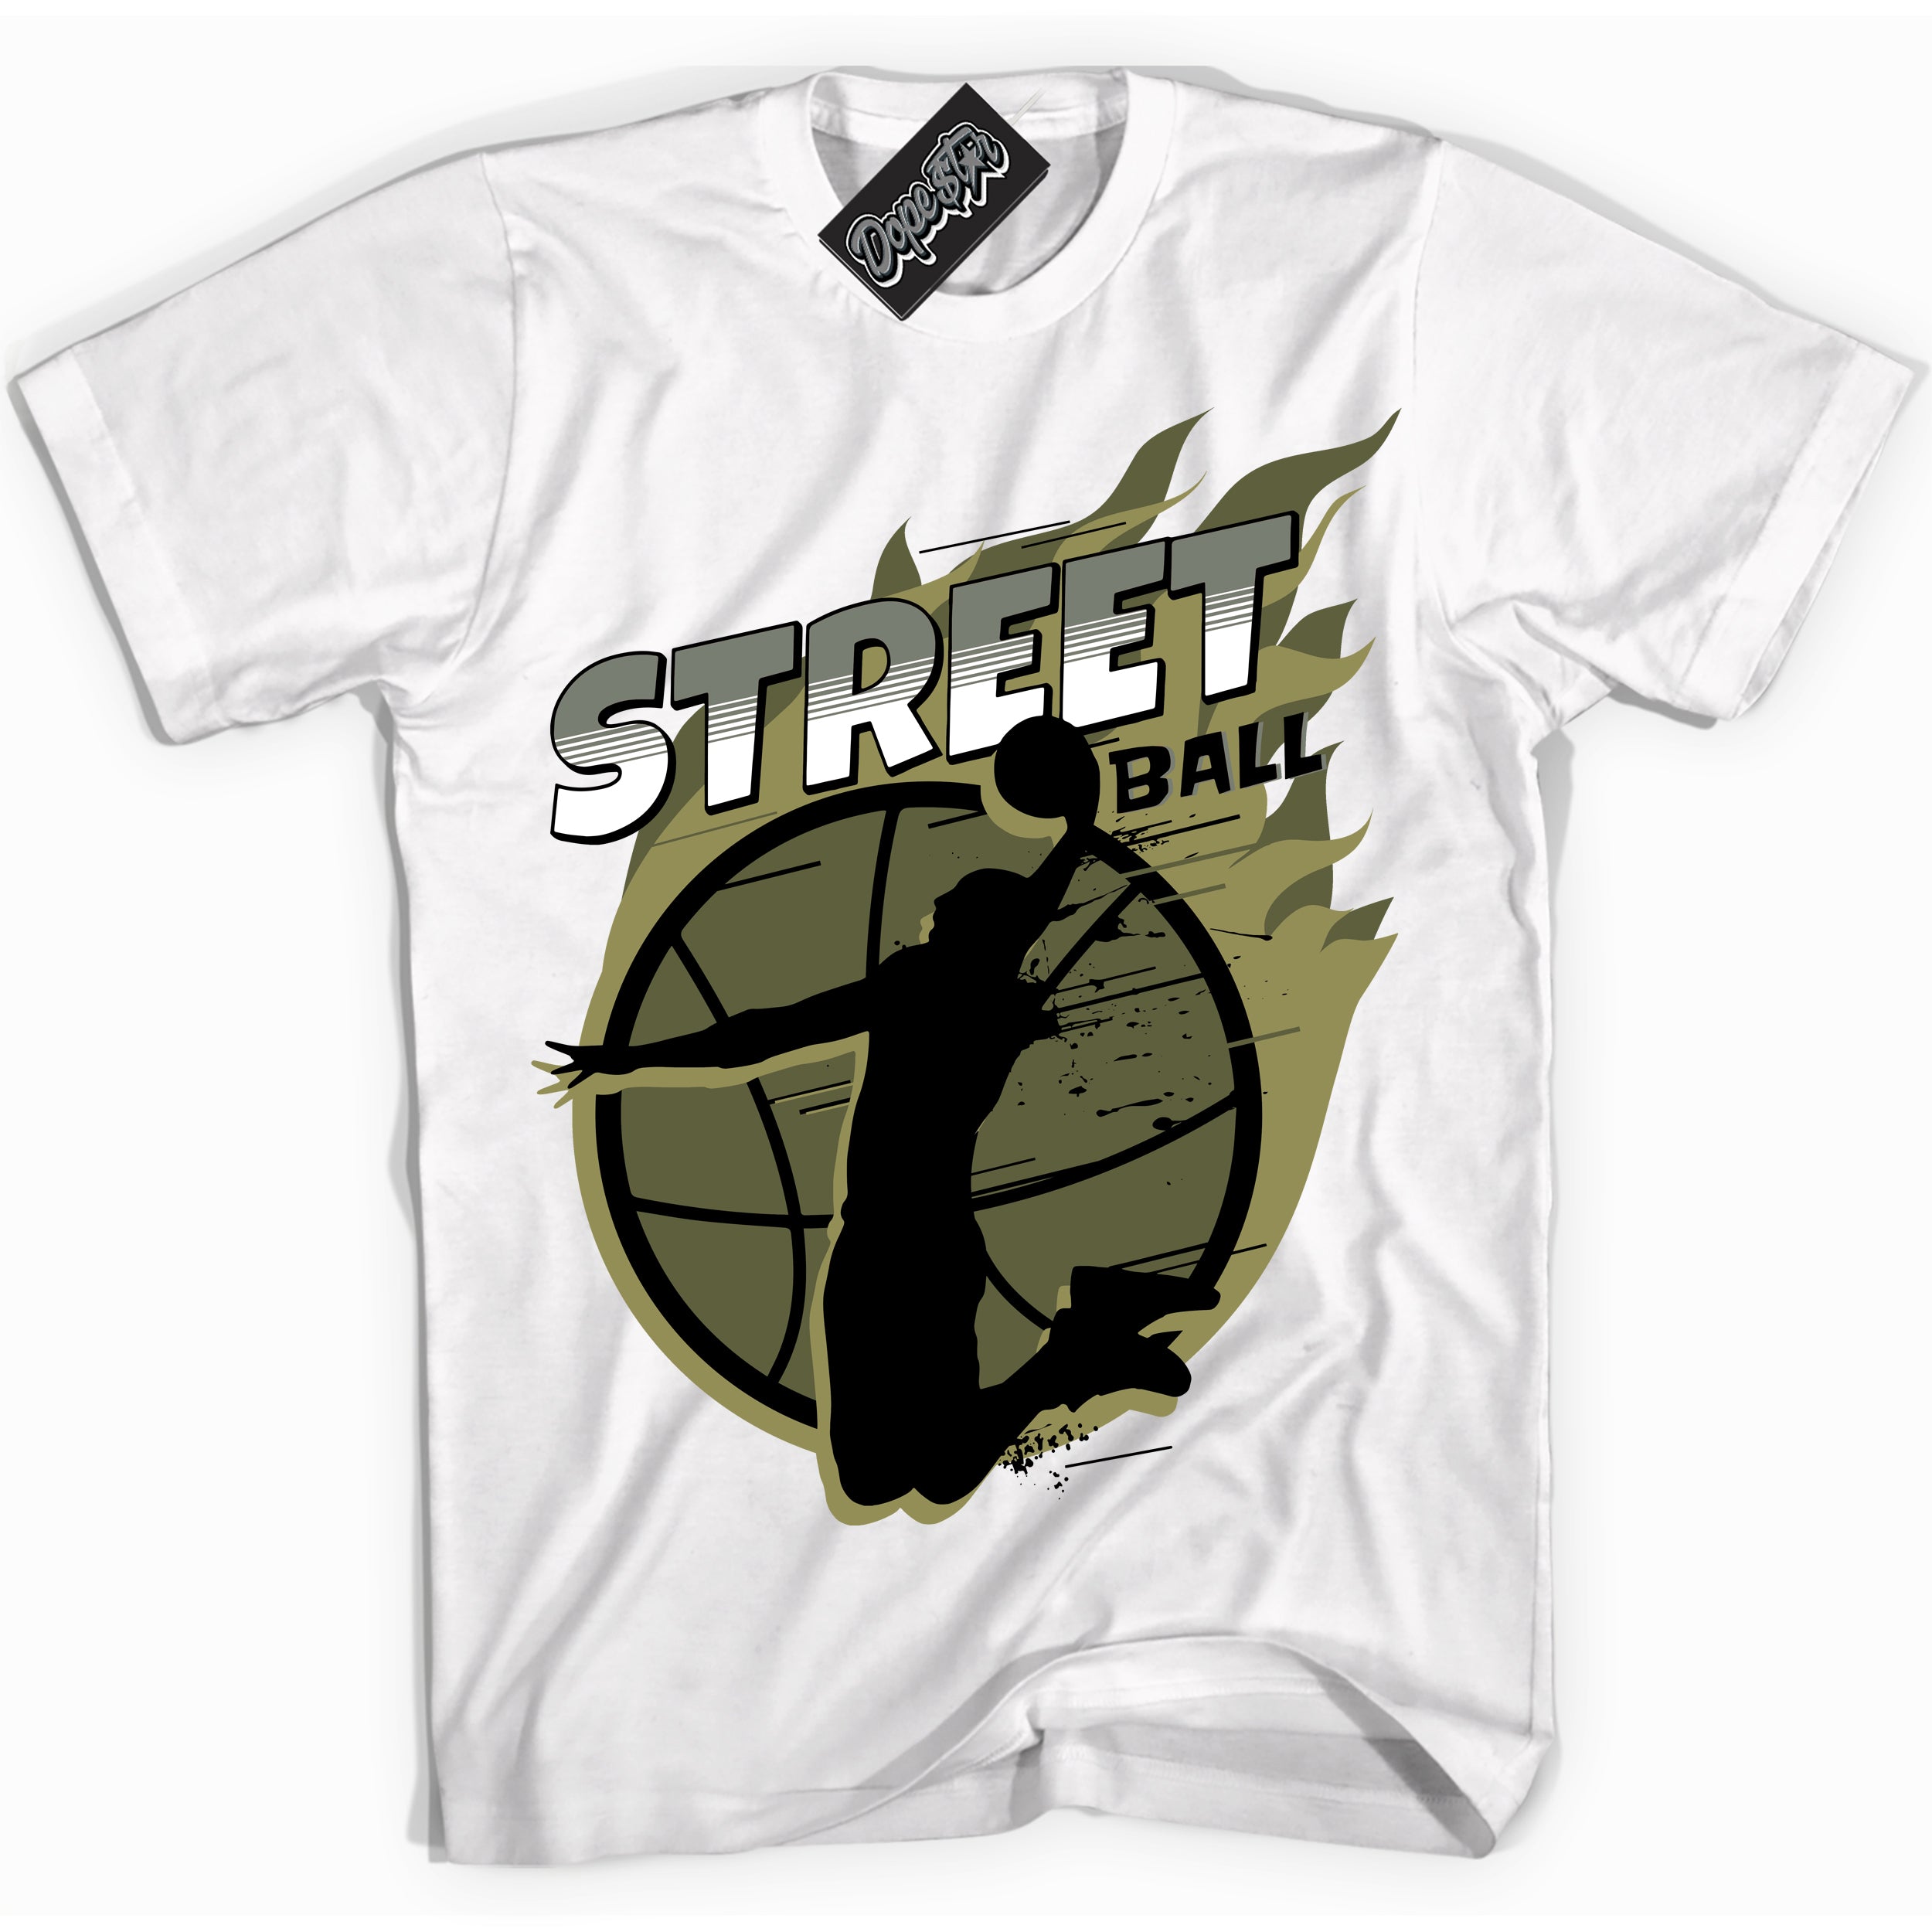 Cool White graphic tee with “ Street Ball ” print, that perfectly matches Craft Olive 4s sneakers 